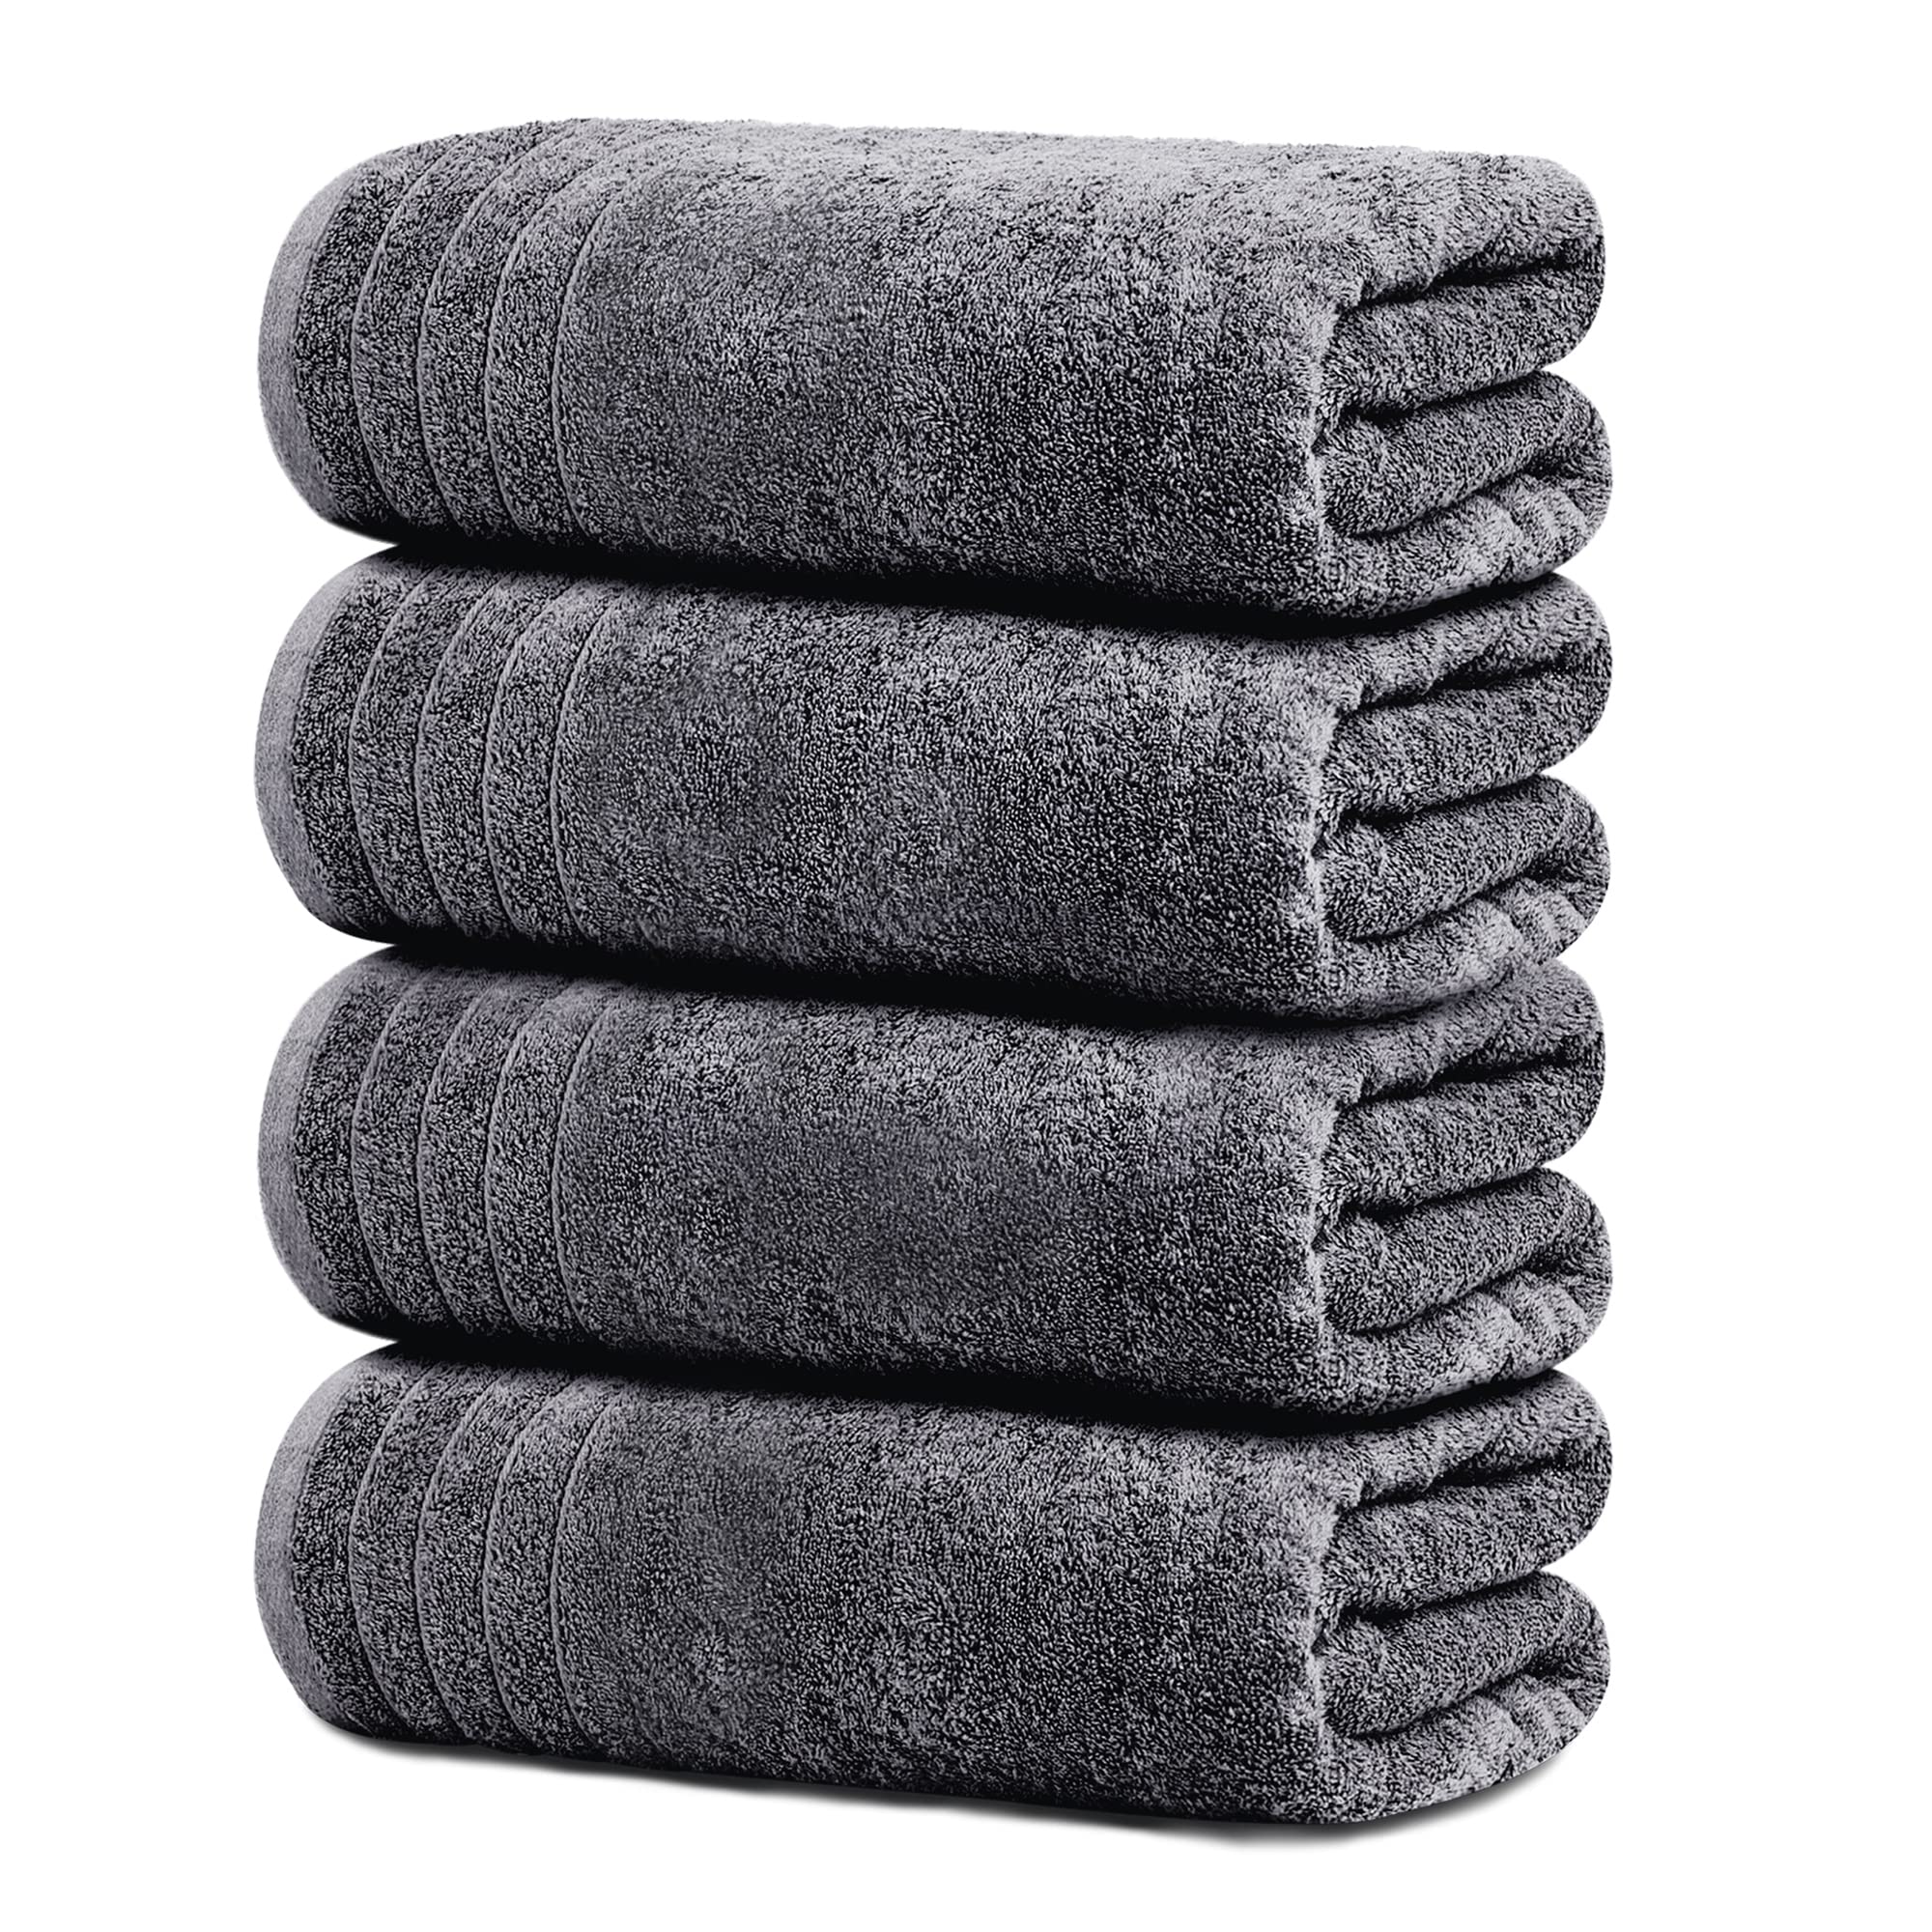 Tens Towels Large Bath Towels, 100% Cotton, 30 x 60 Inches Extra Large Bath  Towels, Lighter Weight, Quicker to Dry, Super Absorb